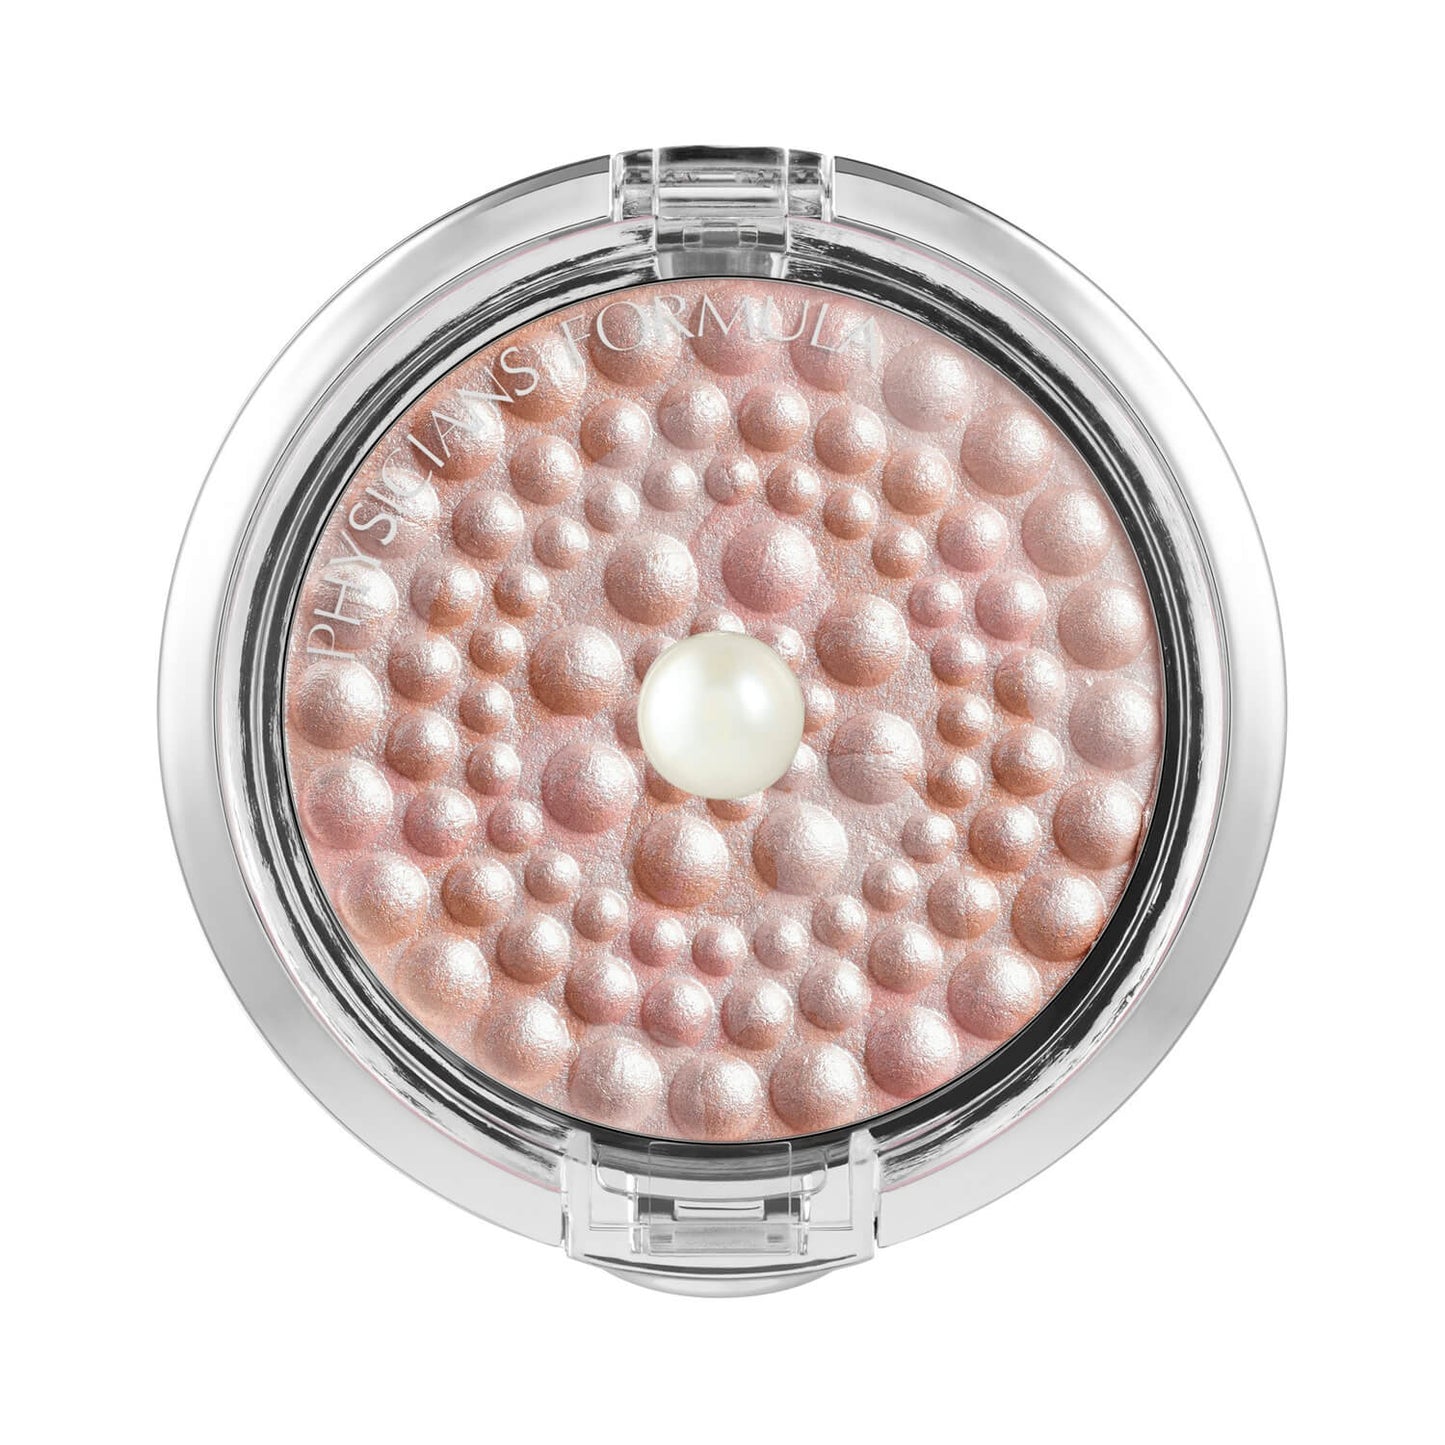 Physicians Formula Powder Palette Mineral Glow Pearls Translucent Pearl 07040-0